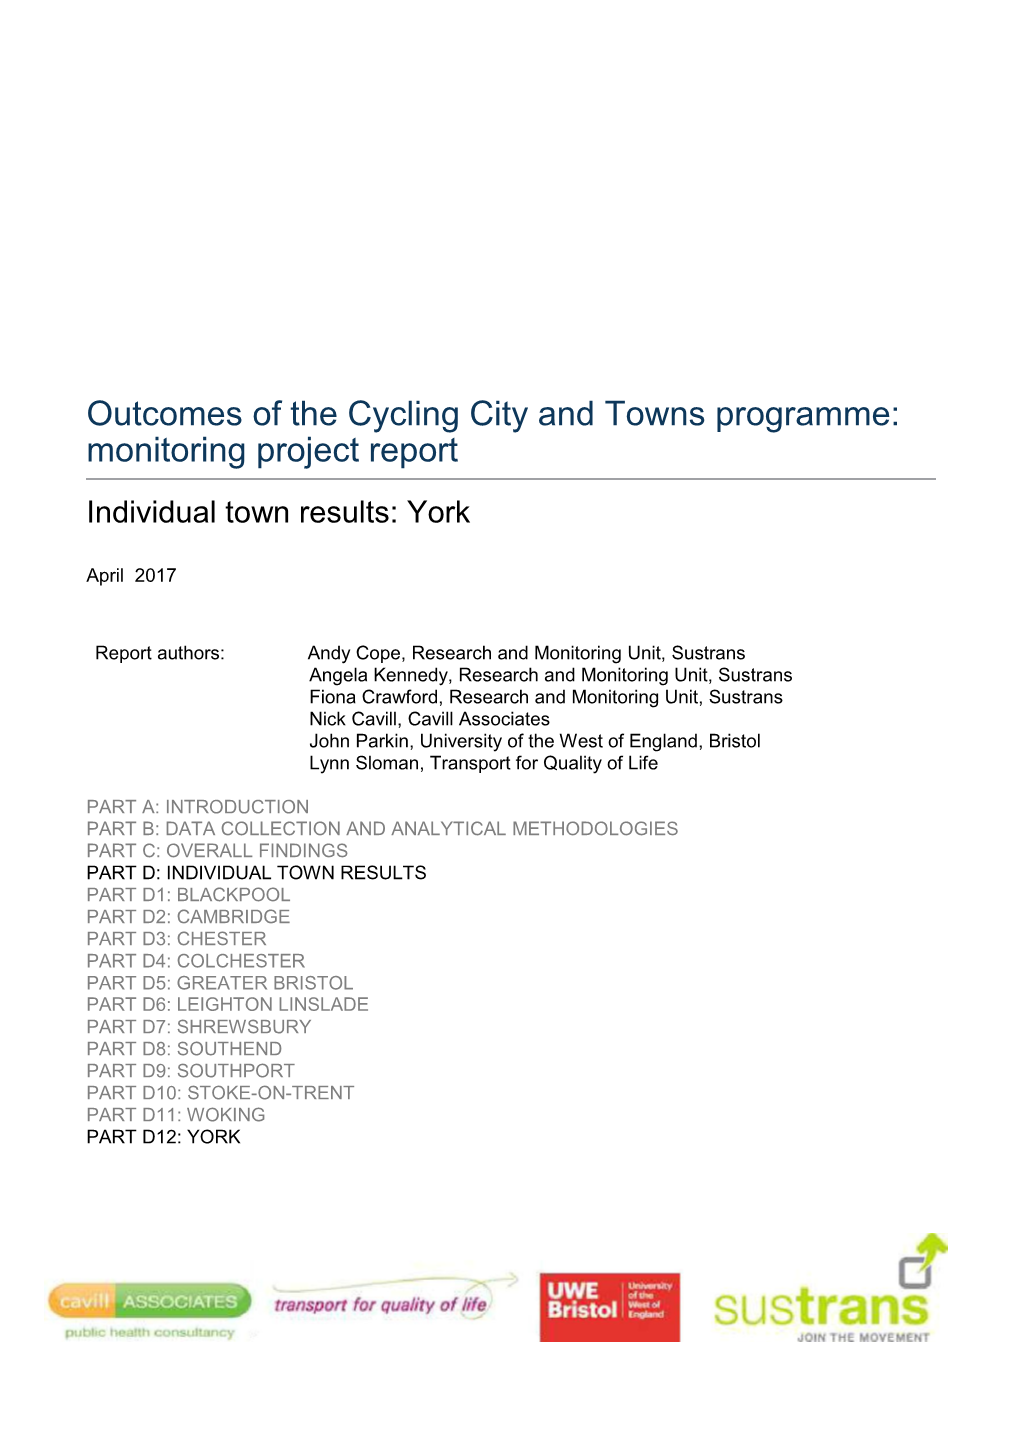 Outcomes of the Cycling City and Towns Programme: Monitoring Project Report